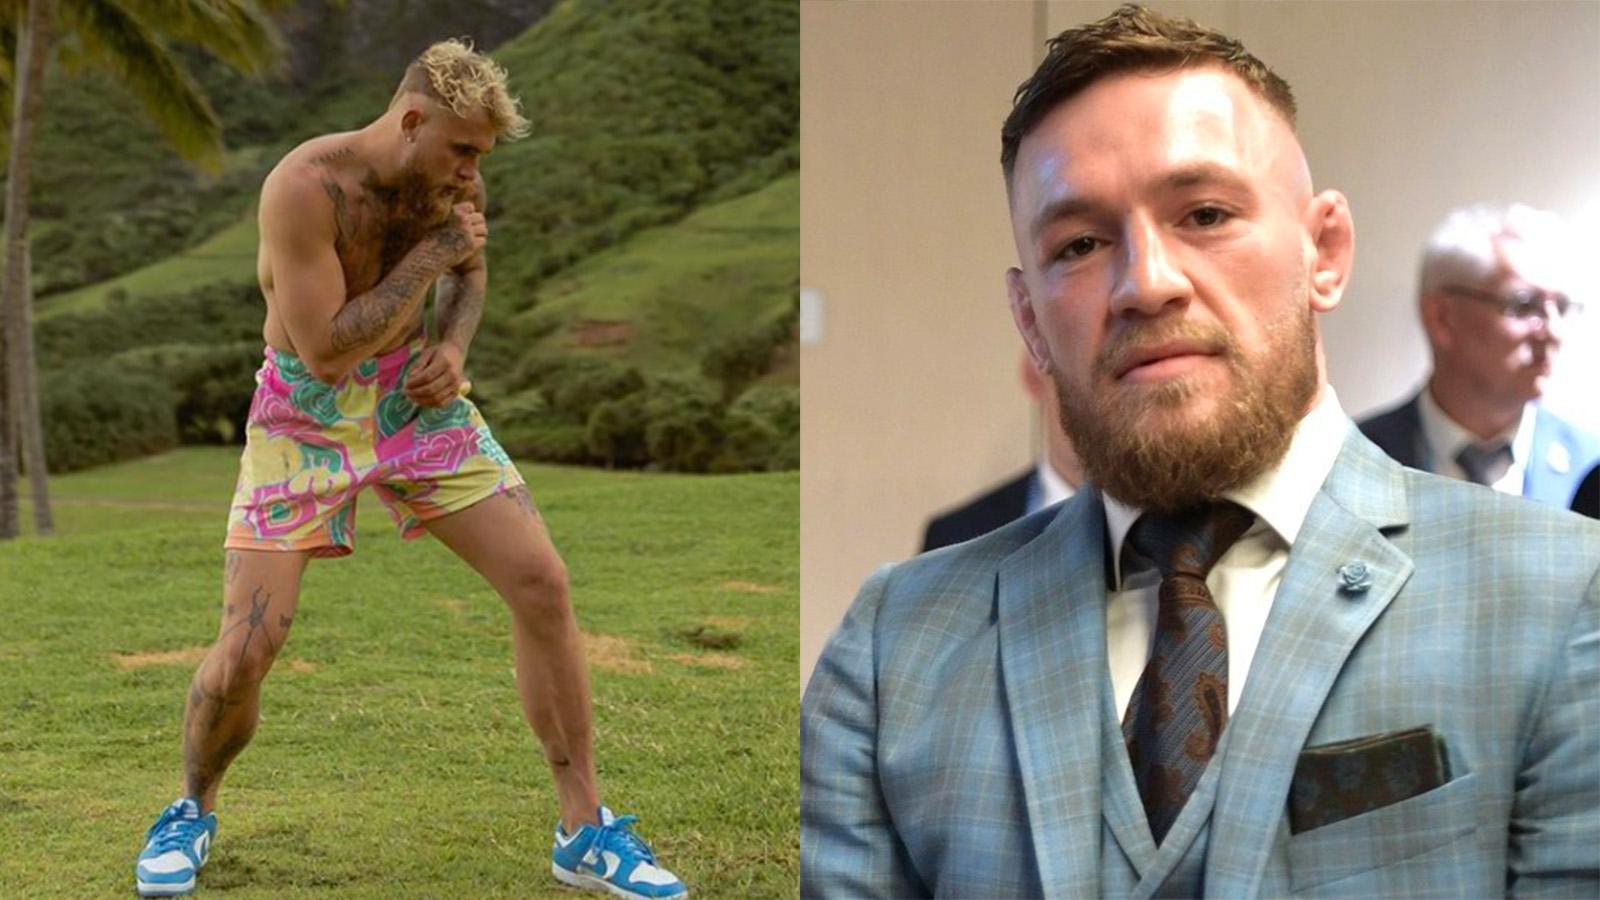 Jake Paul training next to Conor McGregor in a suit